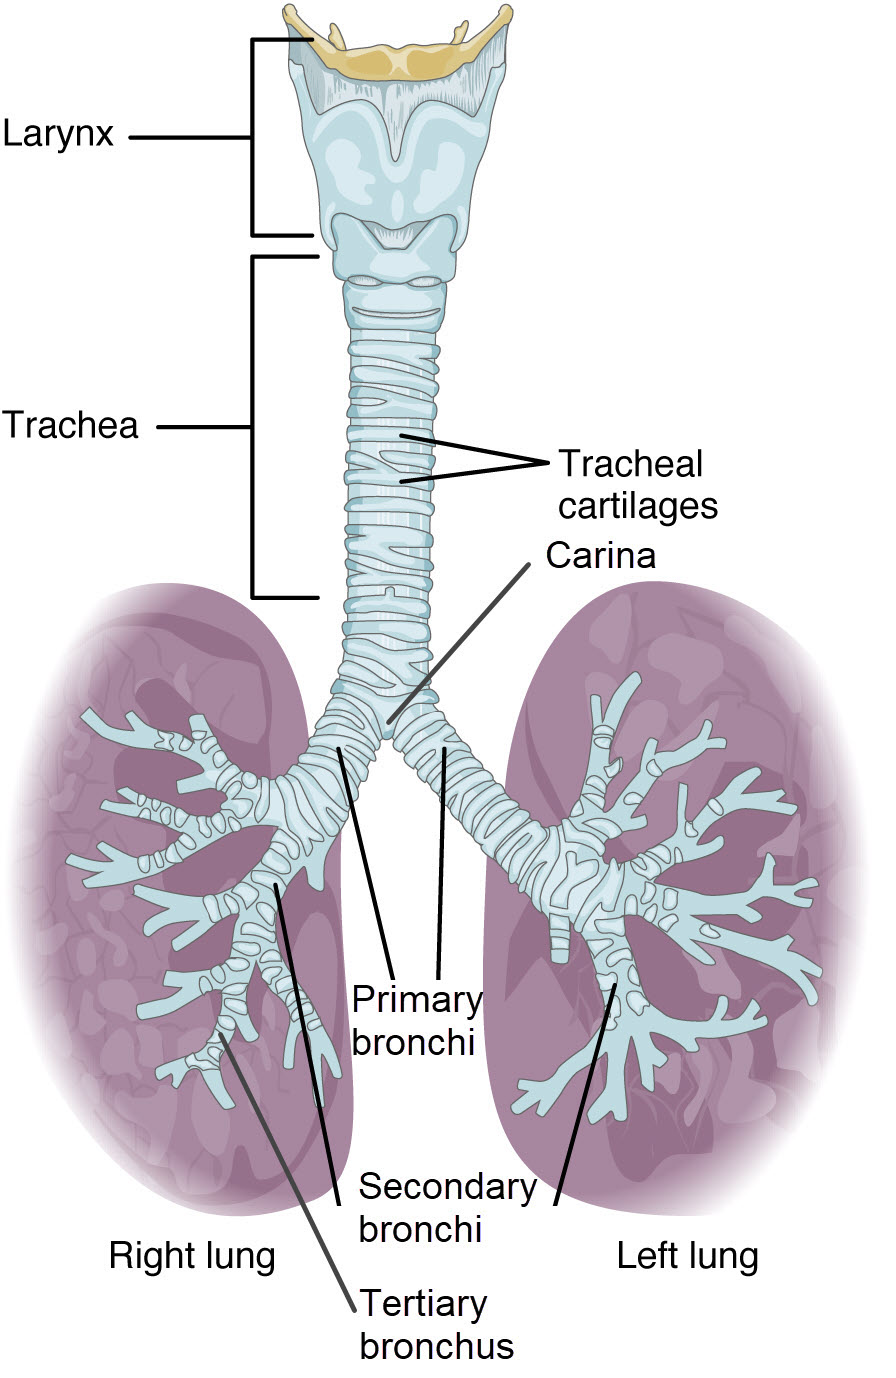 Diagram of the bronchial tree showing the trachea branch to smaller and smaller bronchi.